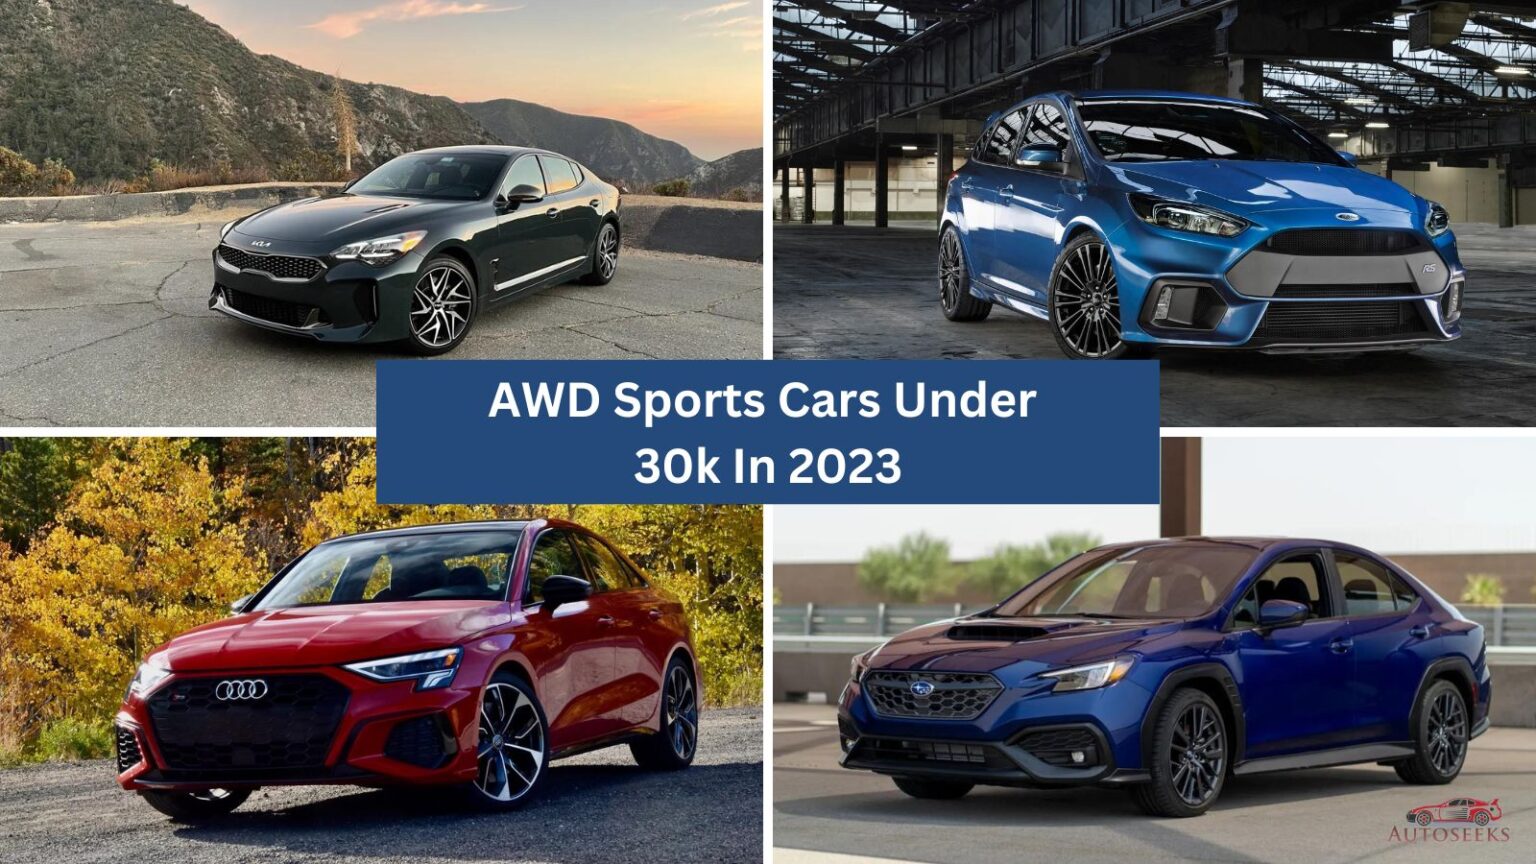 9 AWD Sports Cars Under 30k In 2023 That Worth the Money